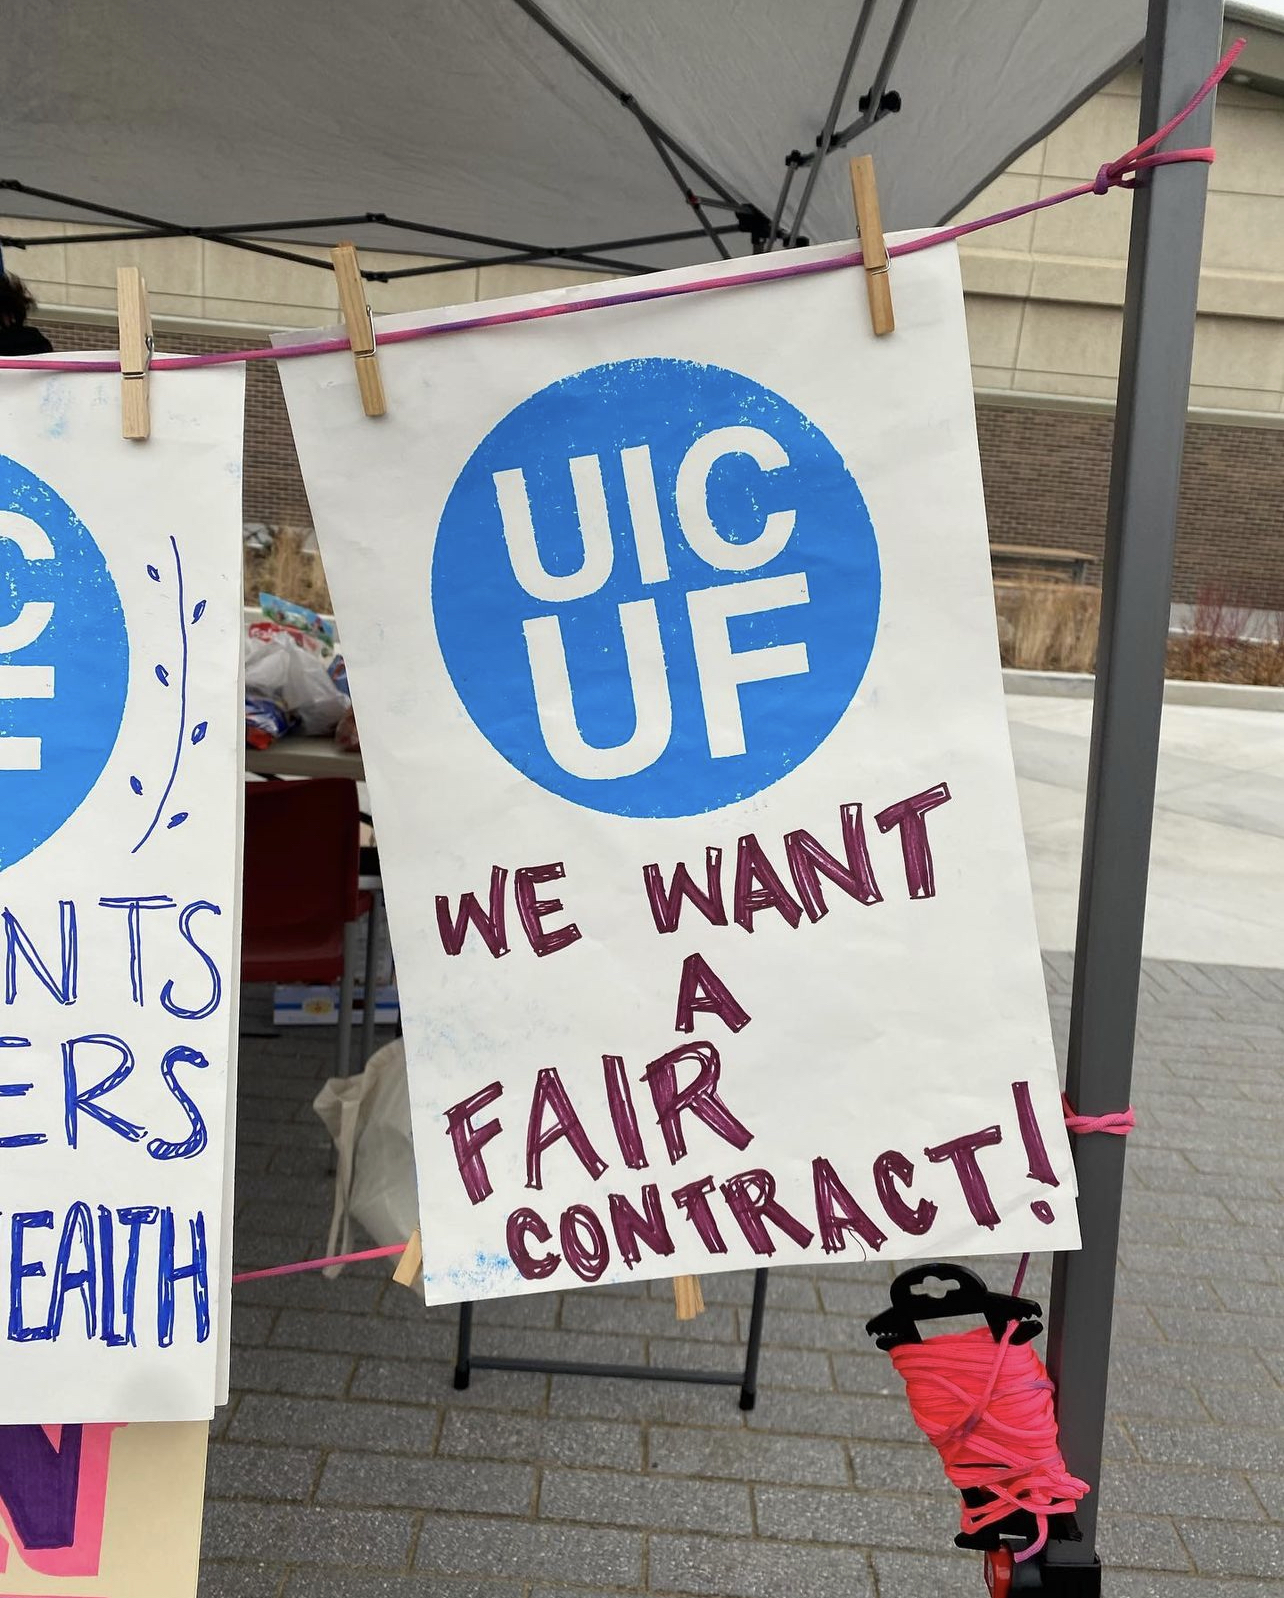 11 x 17 white poster with blue text that says UIC UF and violet text that reads We want a fair contract!